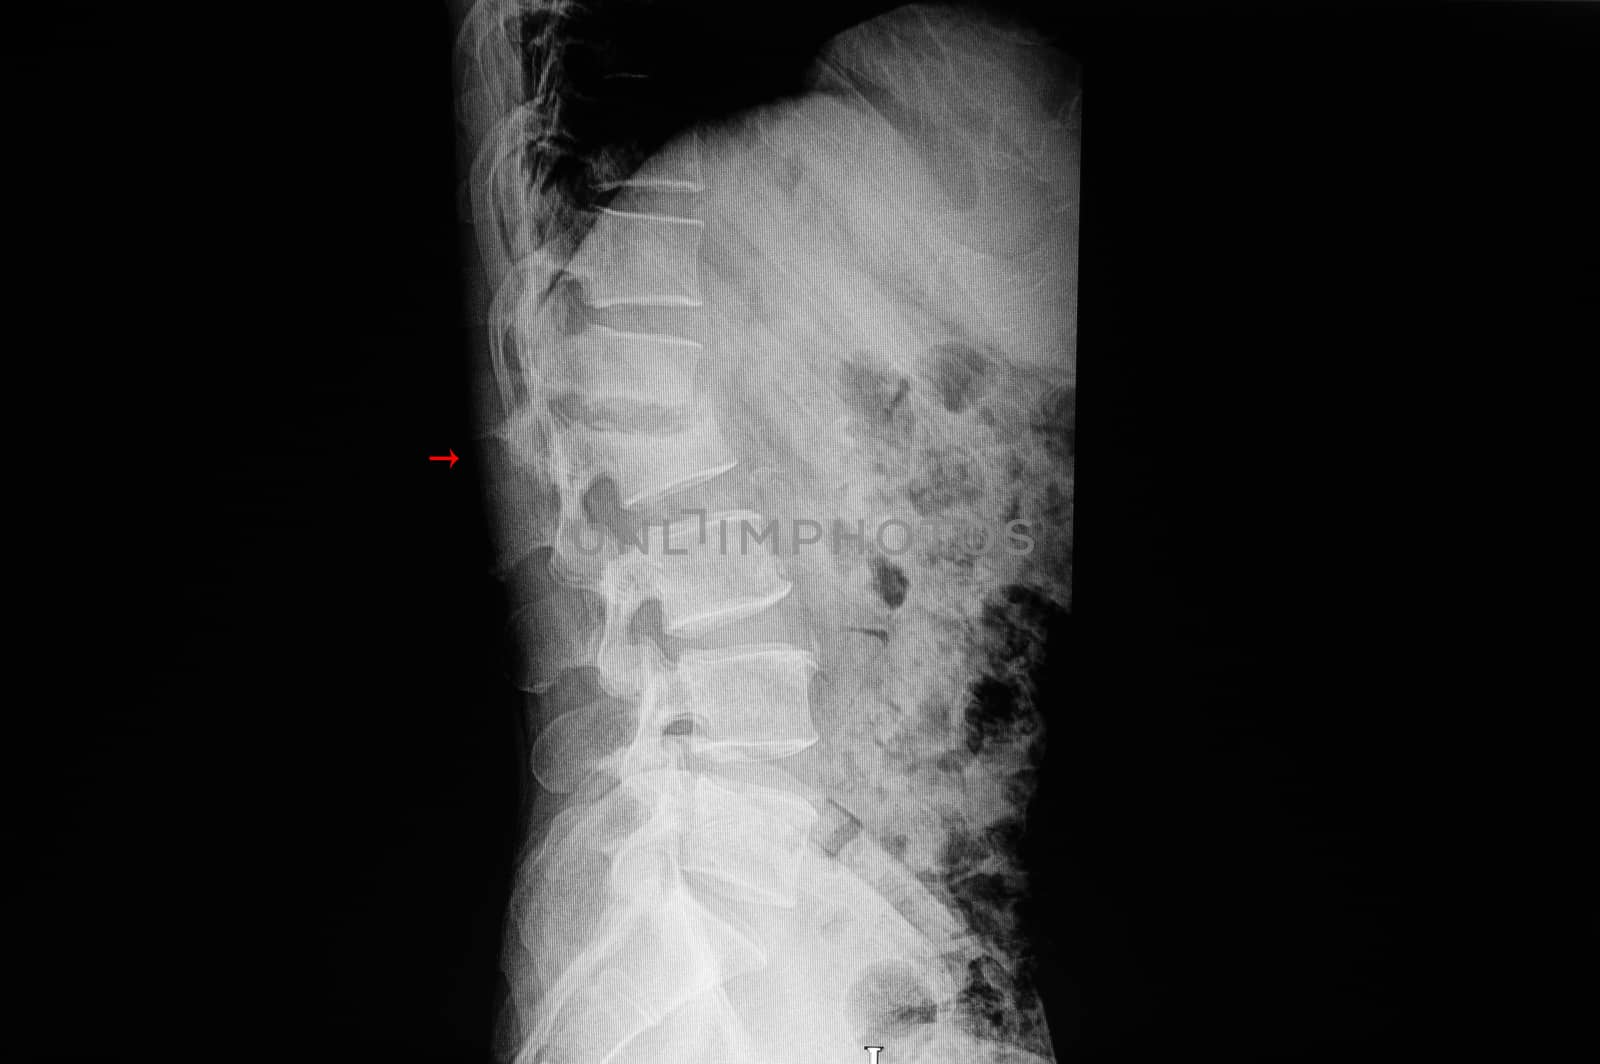 Xray film of a patient with back pain showing compression fracture of L2 vertebral body.